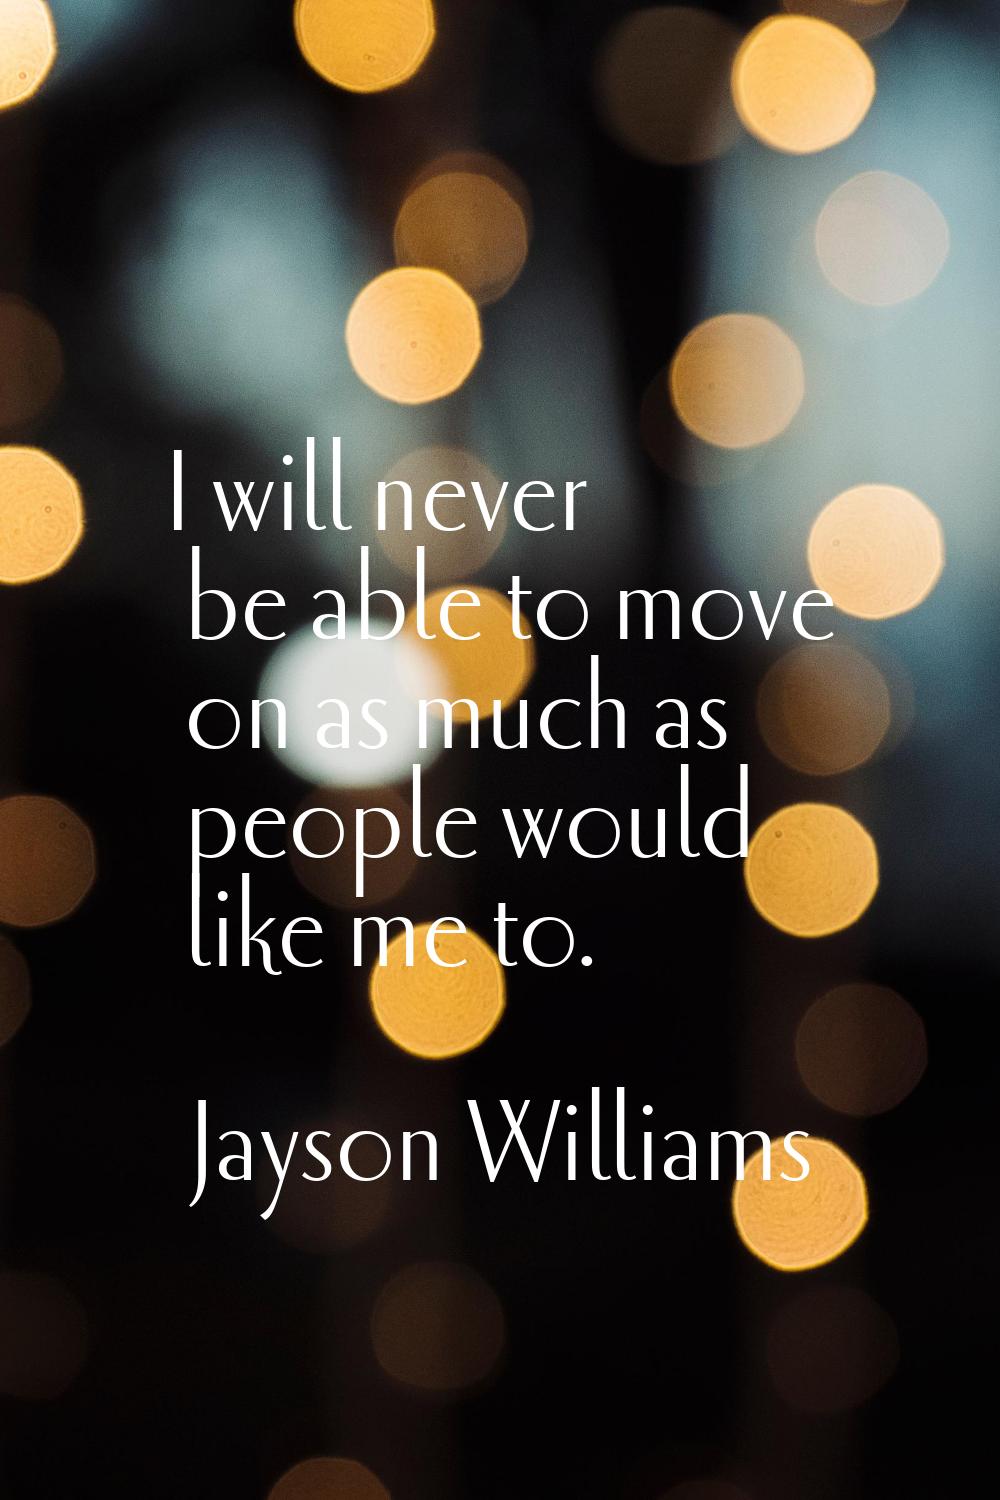 I will never be able to move on as much as people would like me to.